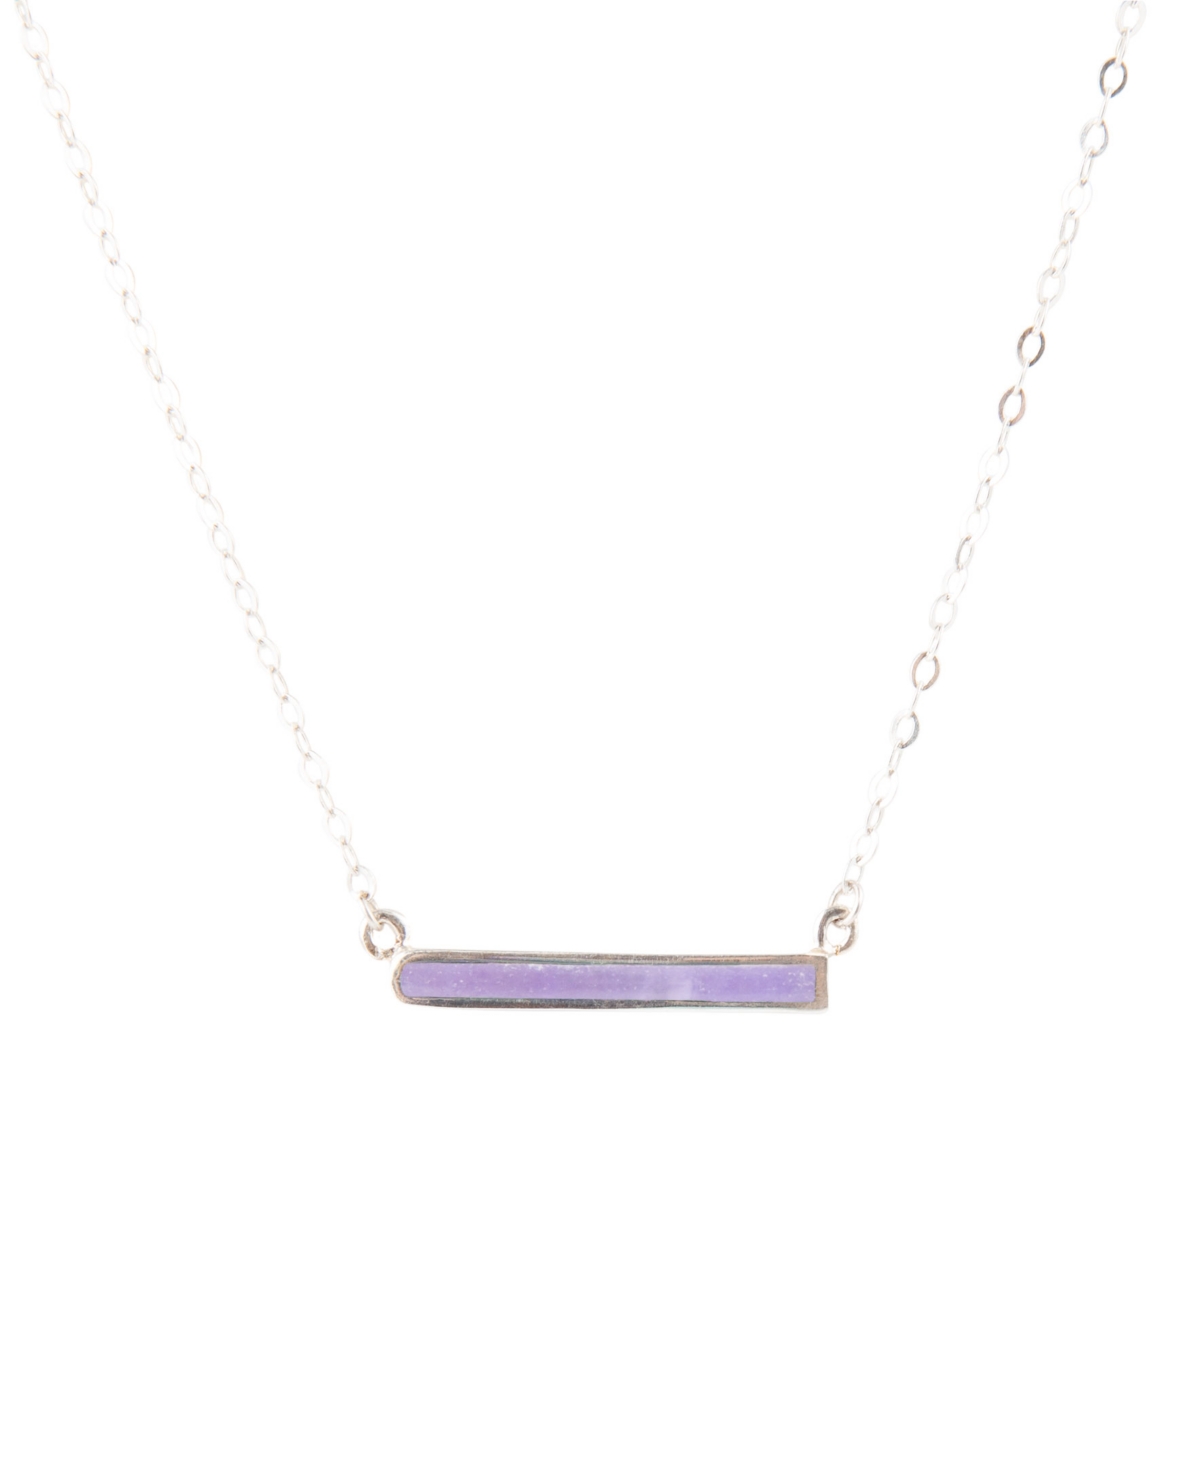 Barse Bar None Sterling Silver And Genuine Onyx Necklace In Genuine Amethyst